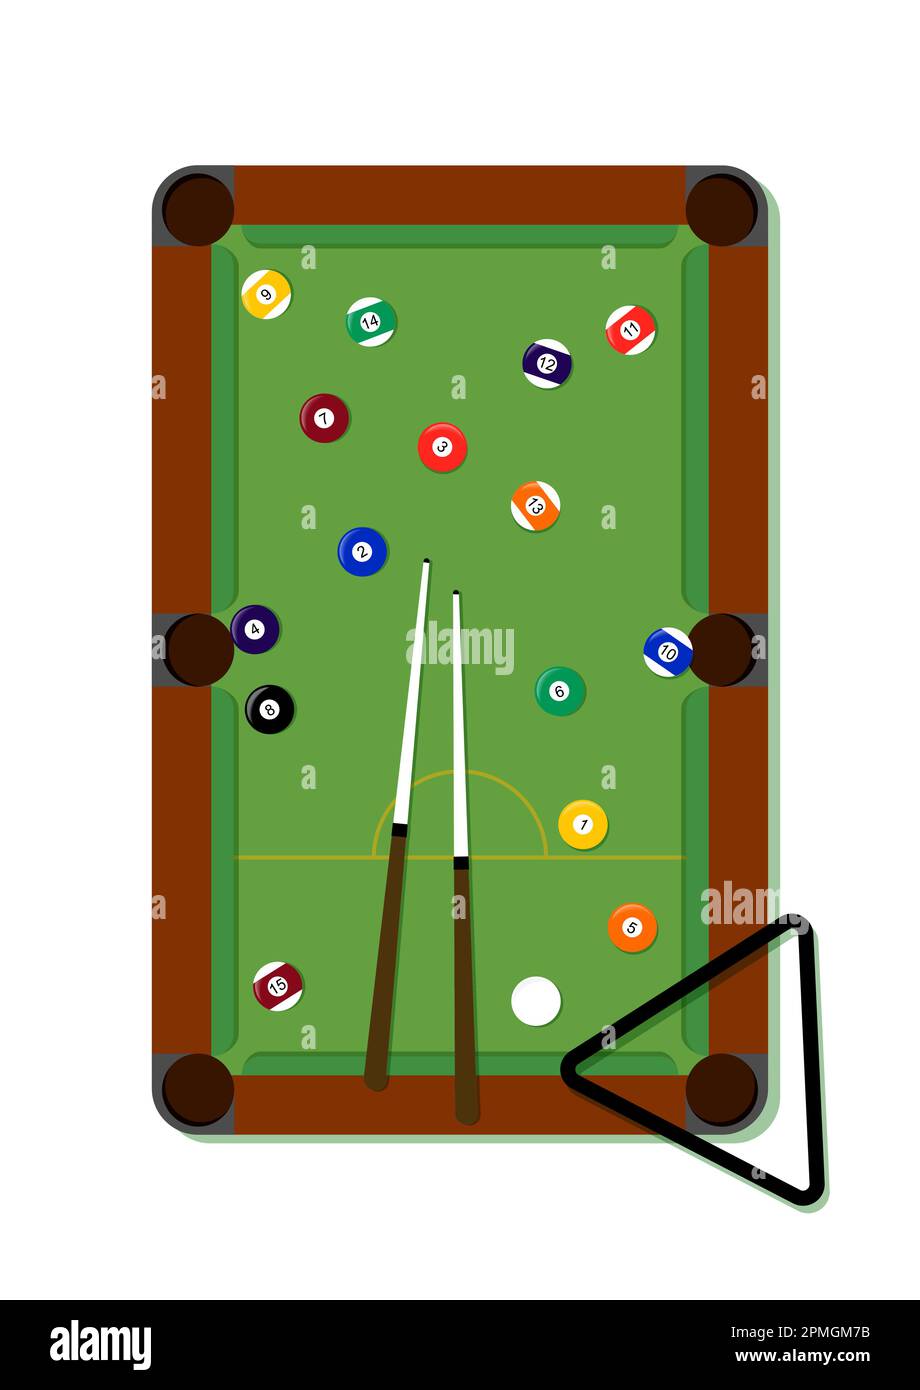 Pool Table Clipart Illustration In Flat Style Isolated On White Background Stock Vector